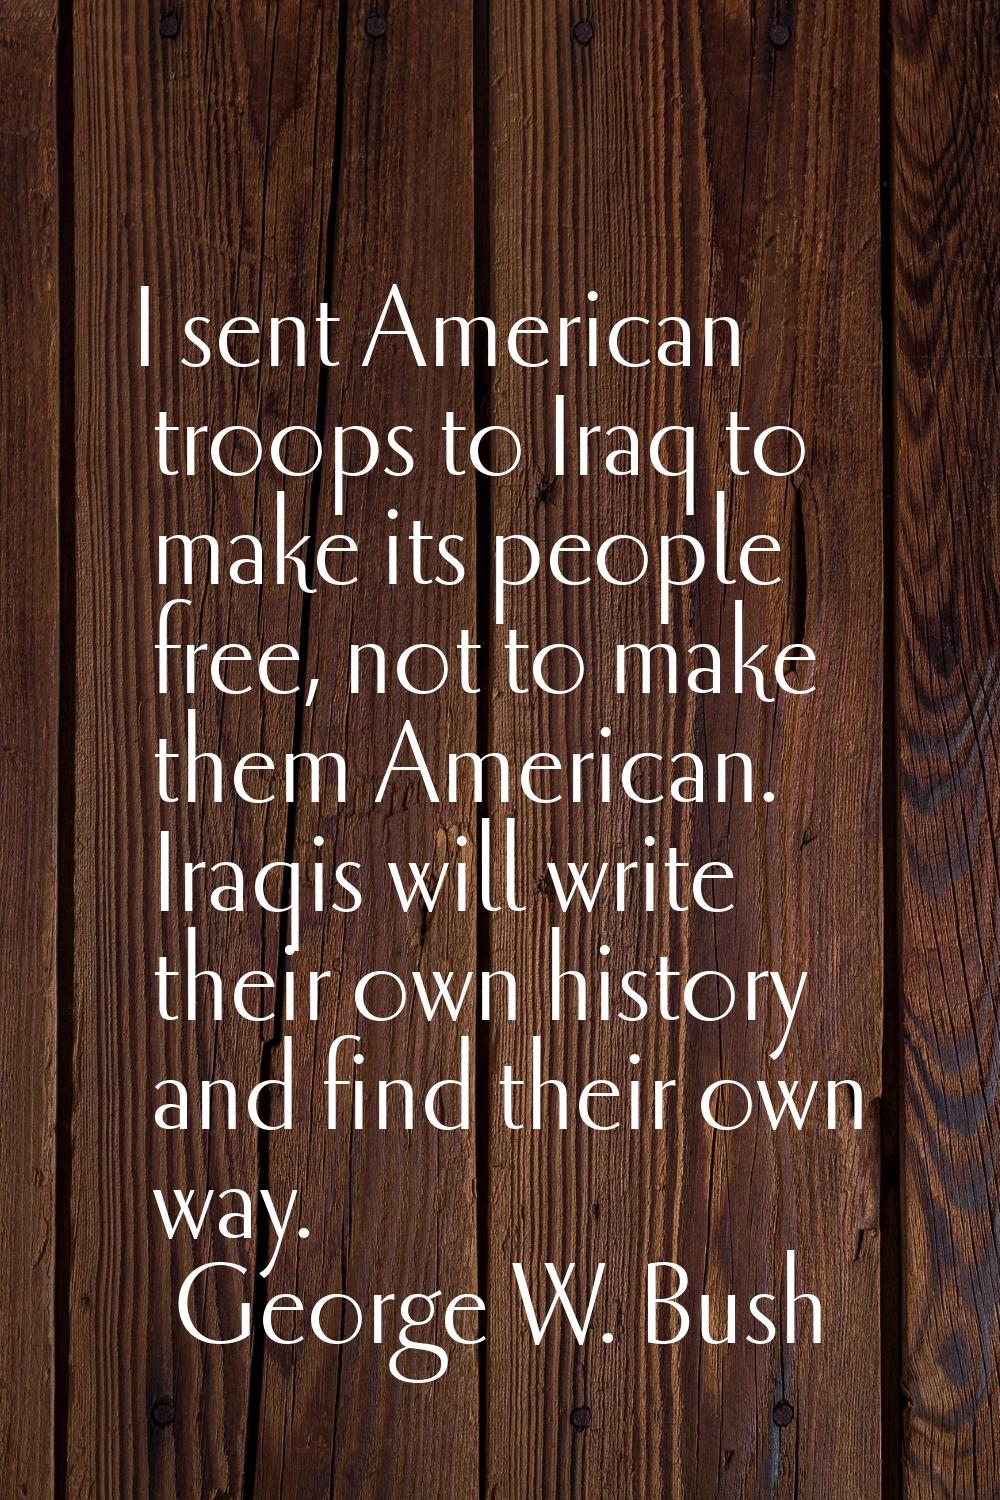 I sent American troops to Iraq to make its people free, not to make them American. Iraqis will writ